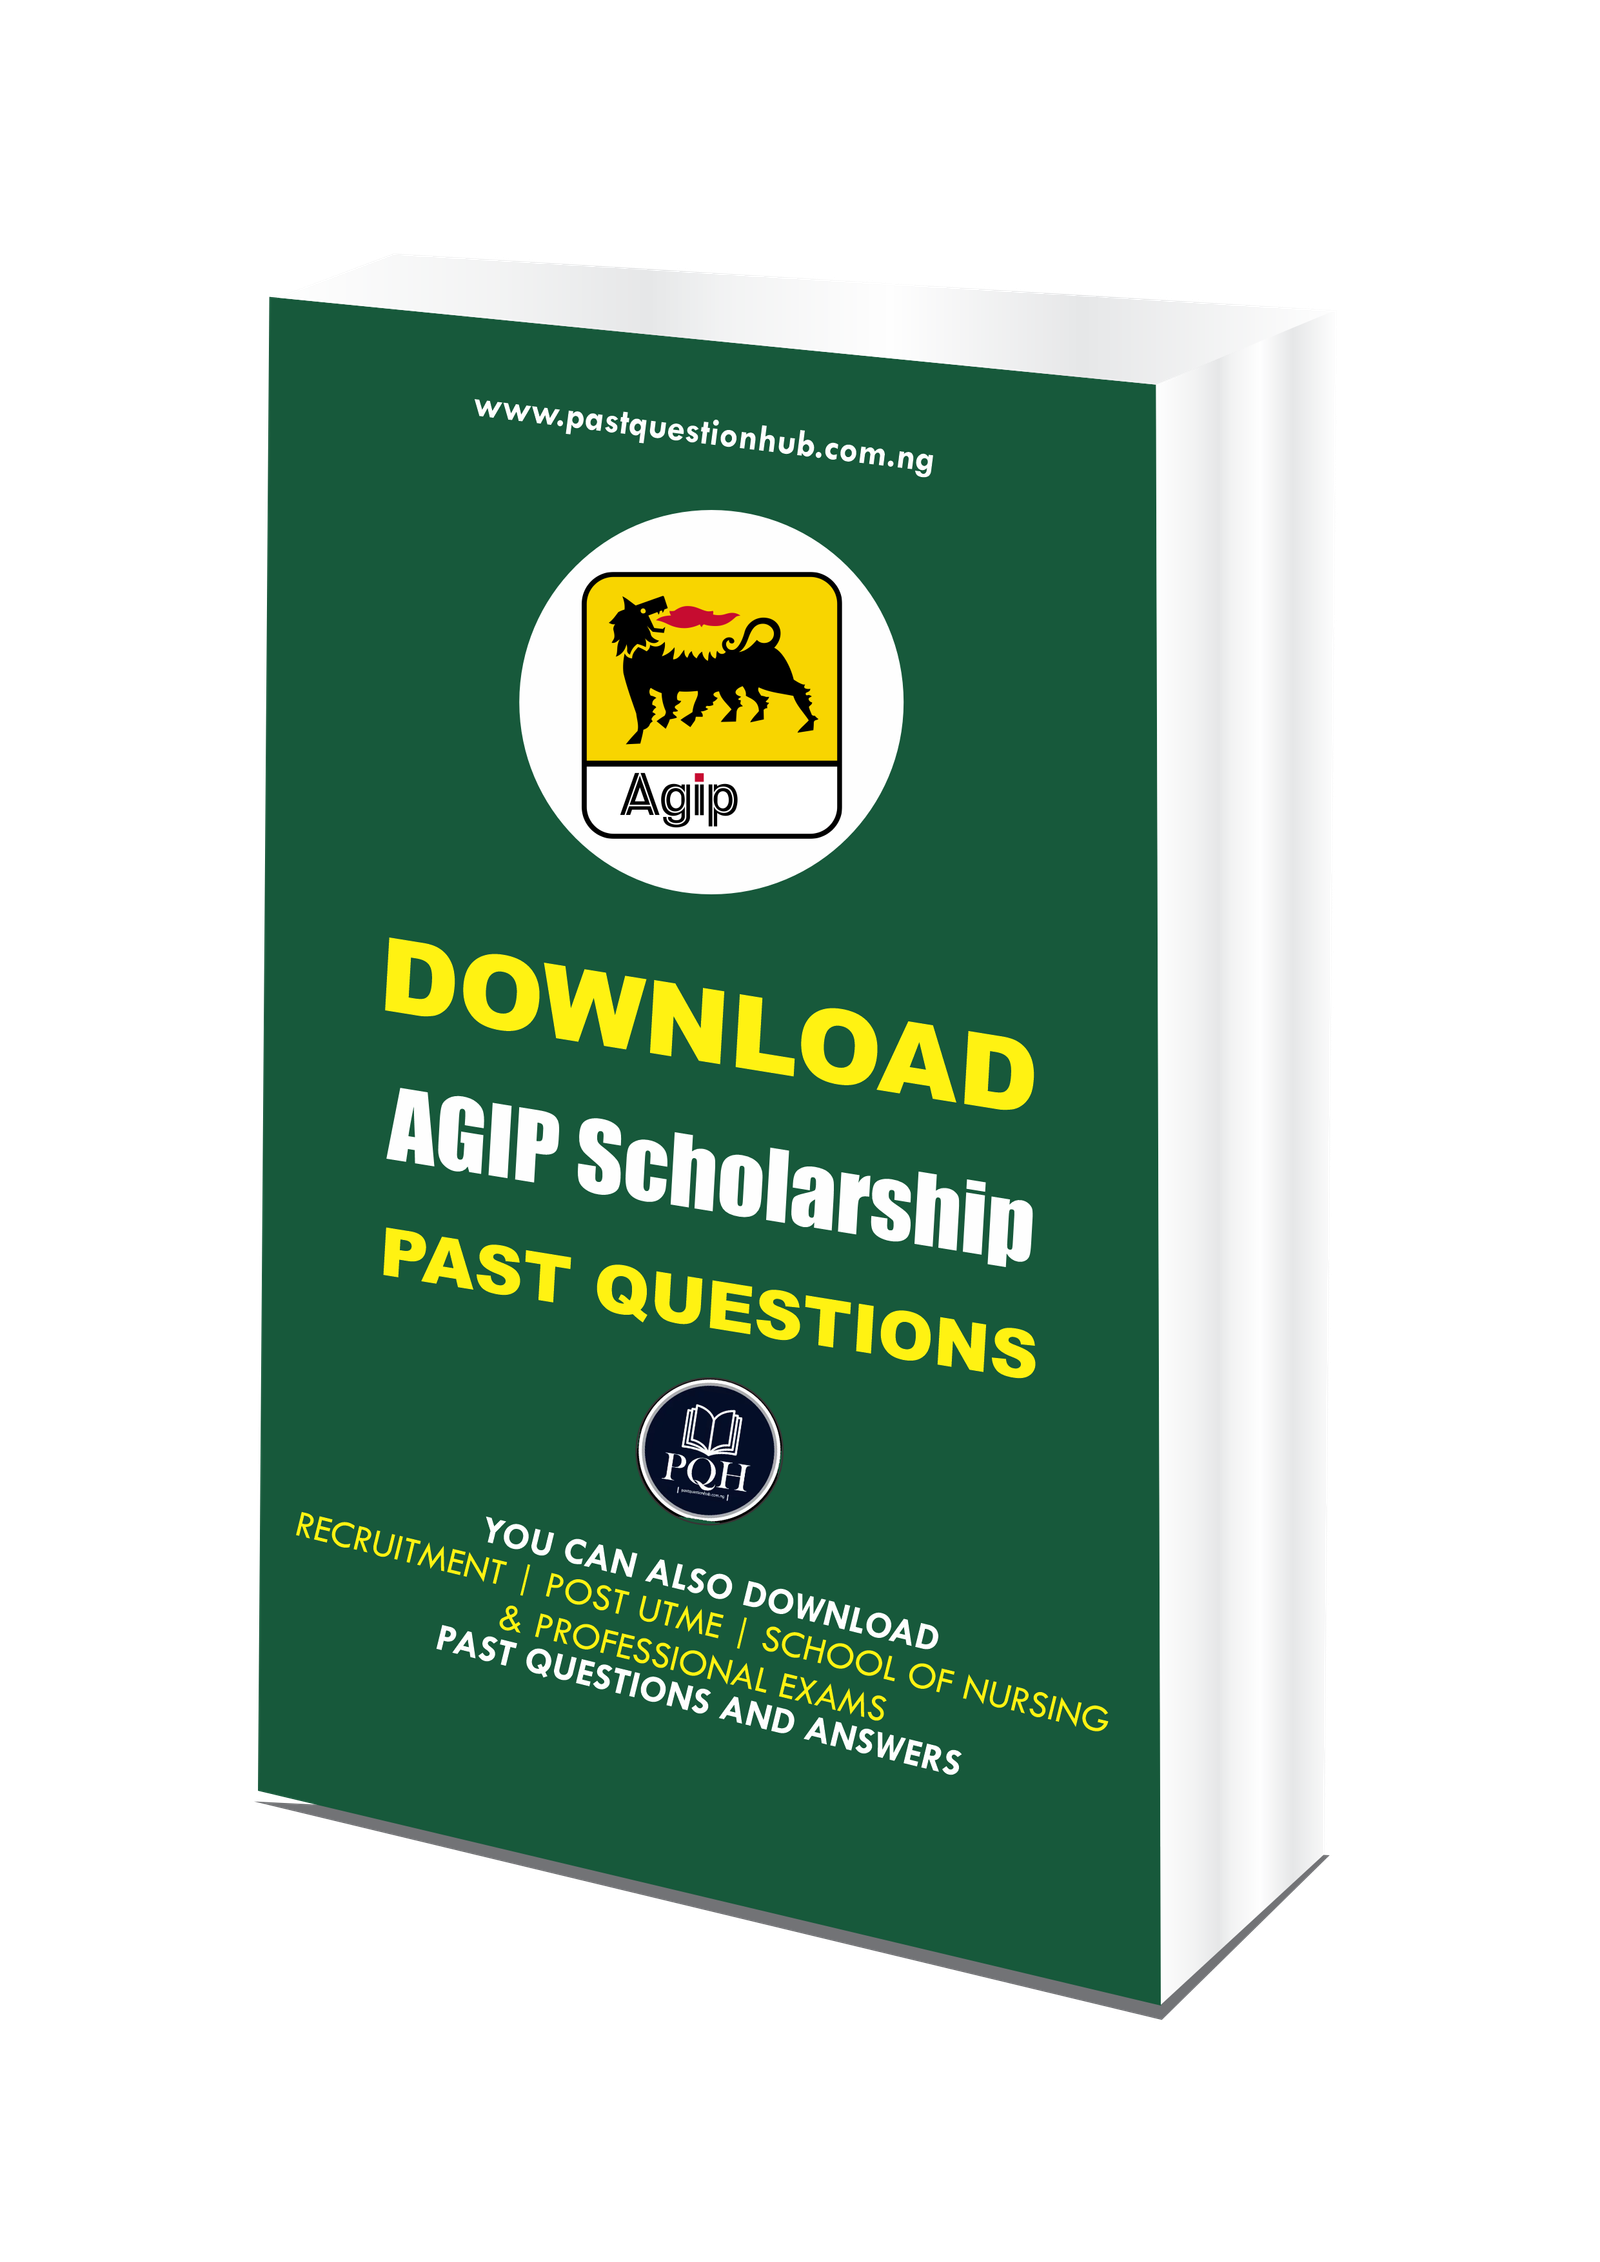 AGIP Scholarship Past Questions and Answers PDF